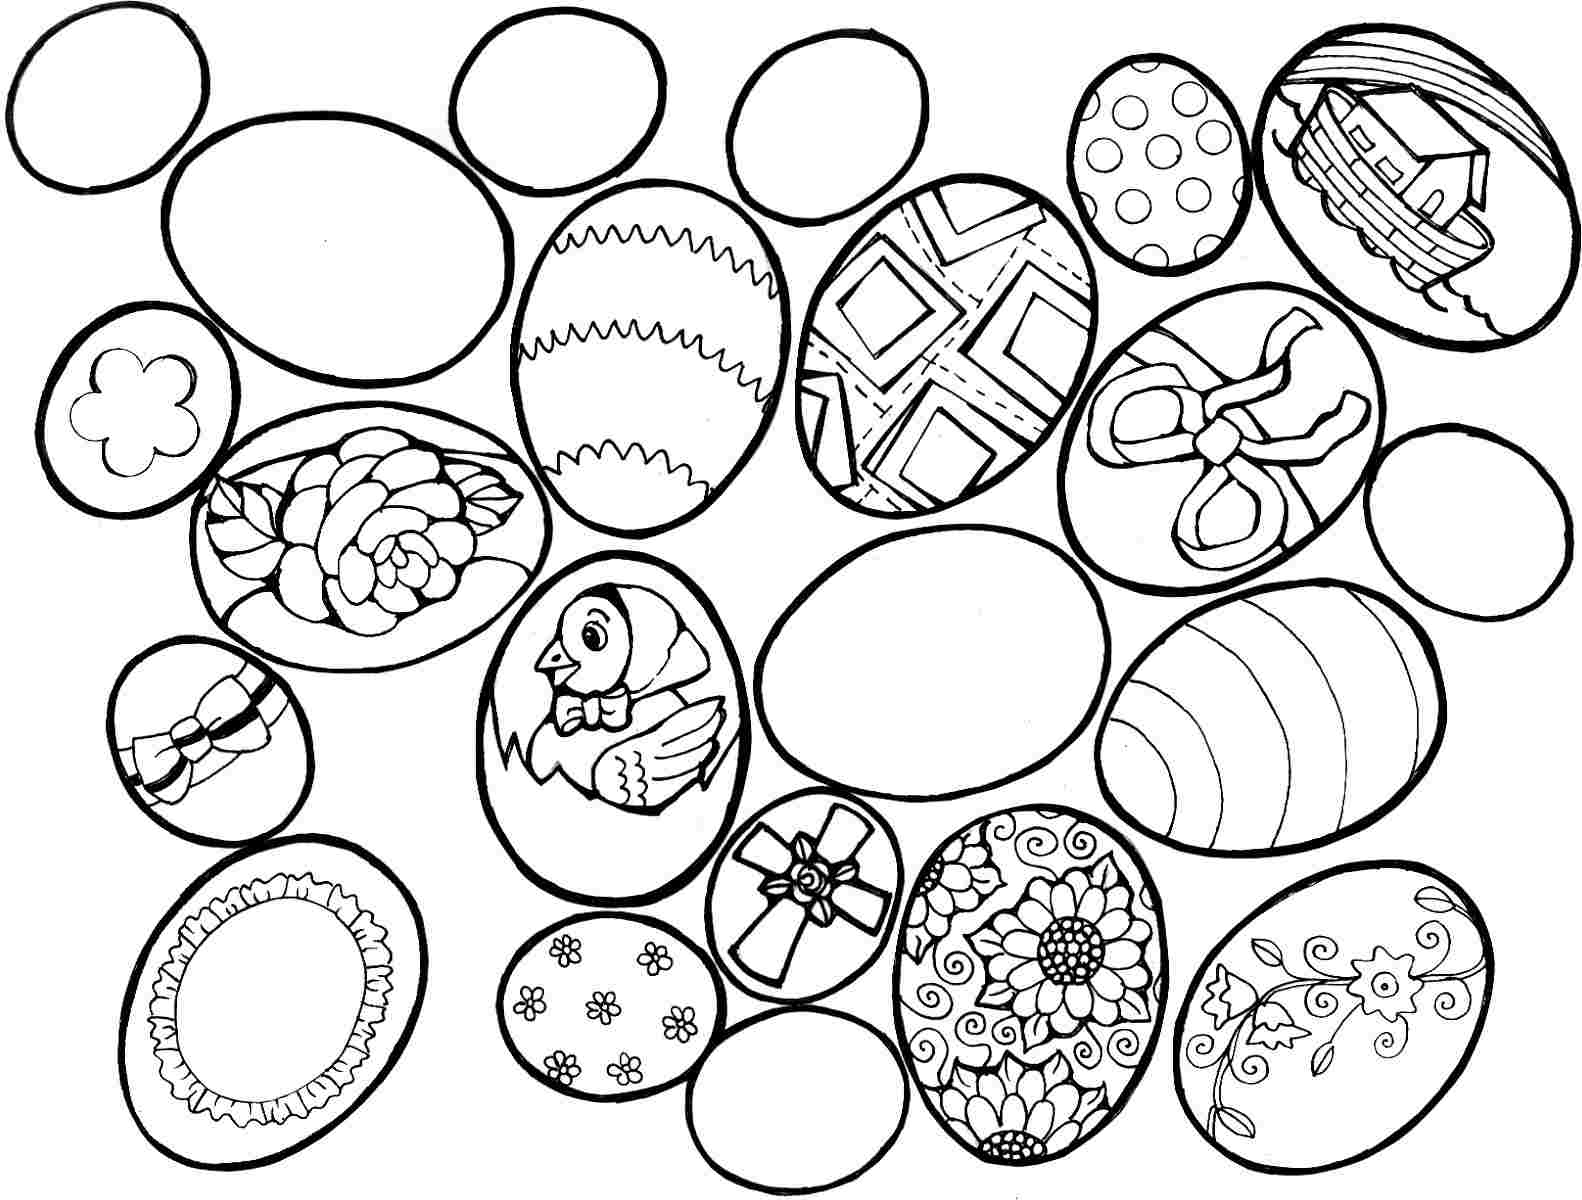 Plain Easter Egg Coloring Pages at GetDrawings | Free download